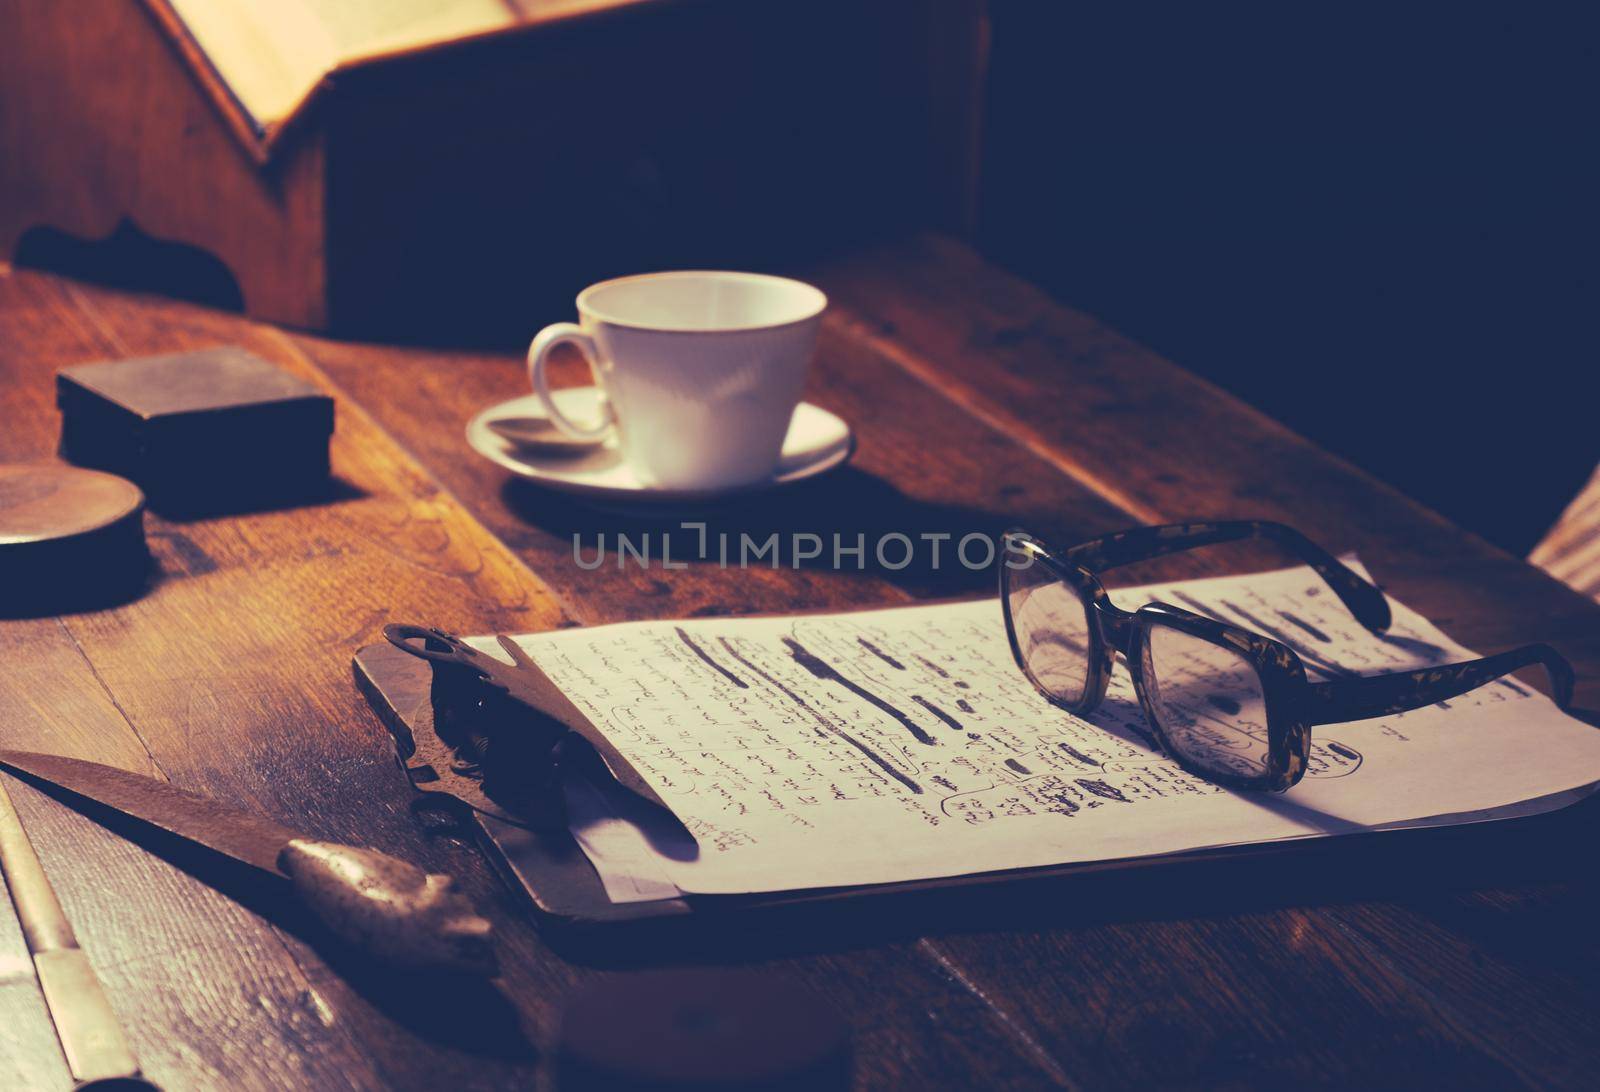 Detail Of A Writer Or Academic's Desk With Manuscript, Glasses And A Cup Of Tea